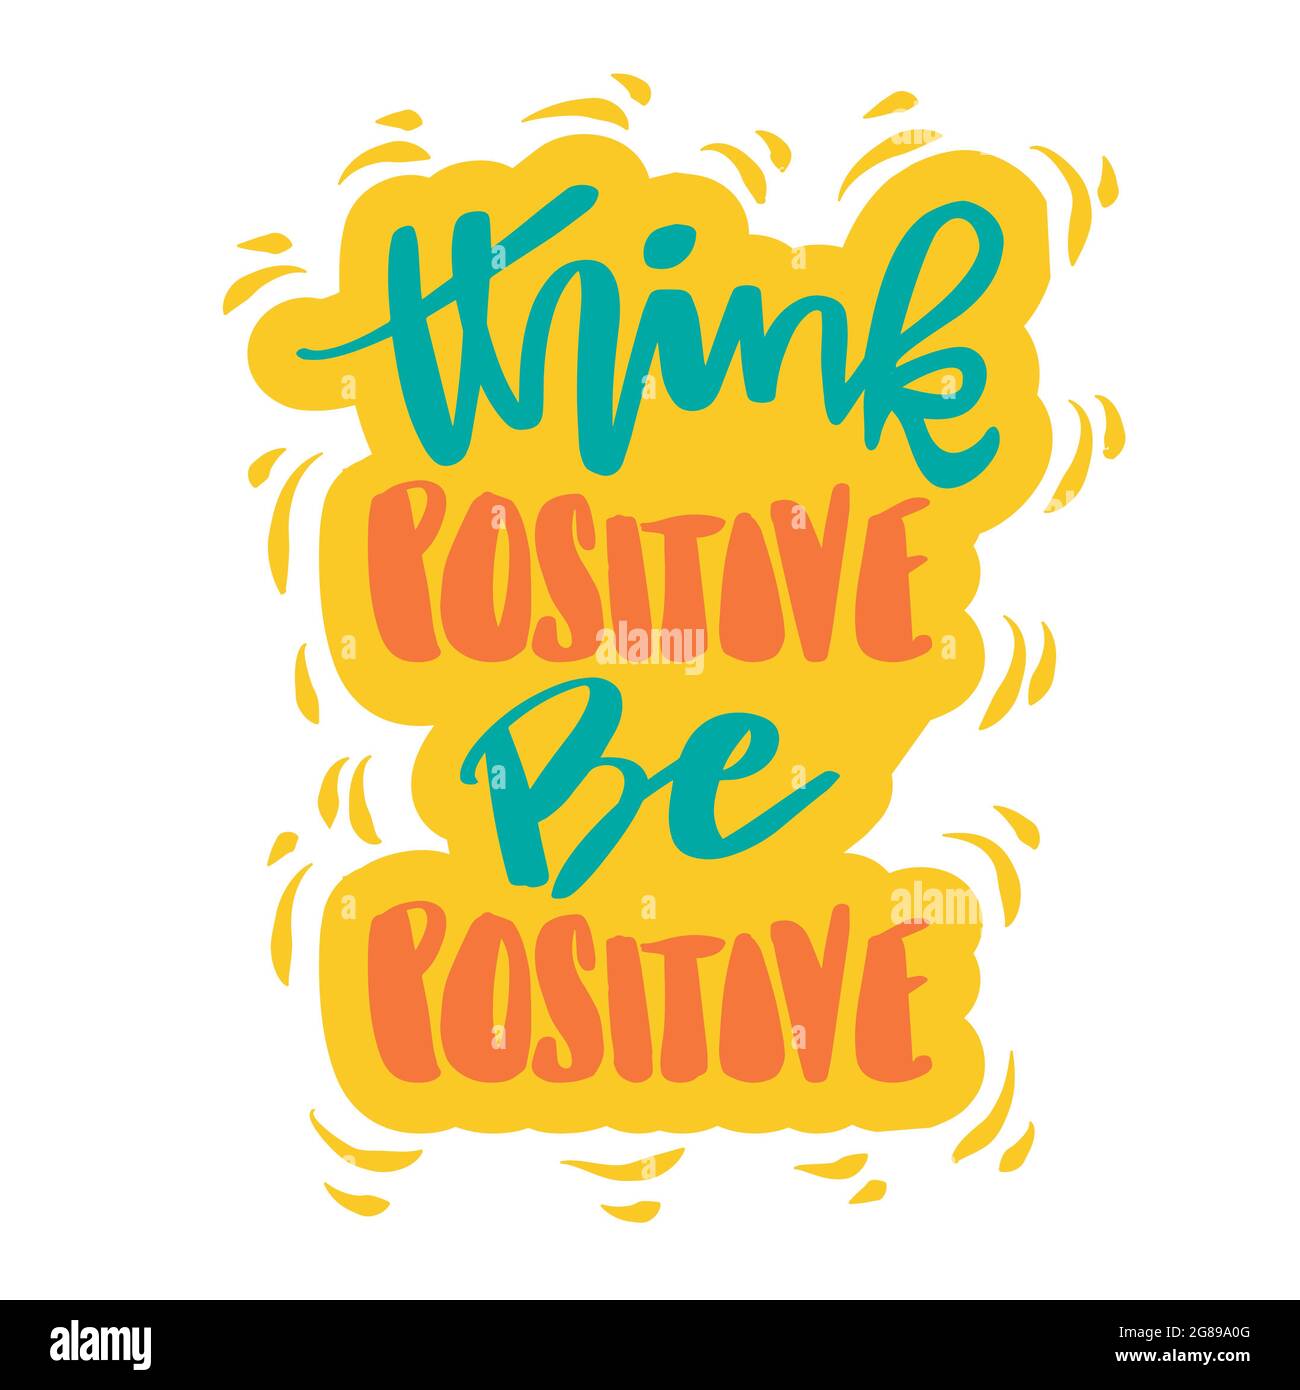 Think positive be positive. Hand lettering, motivational quote. Stock Photo